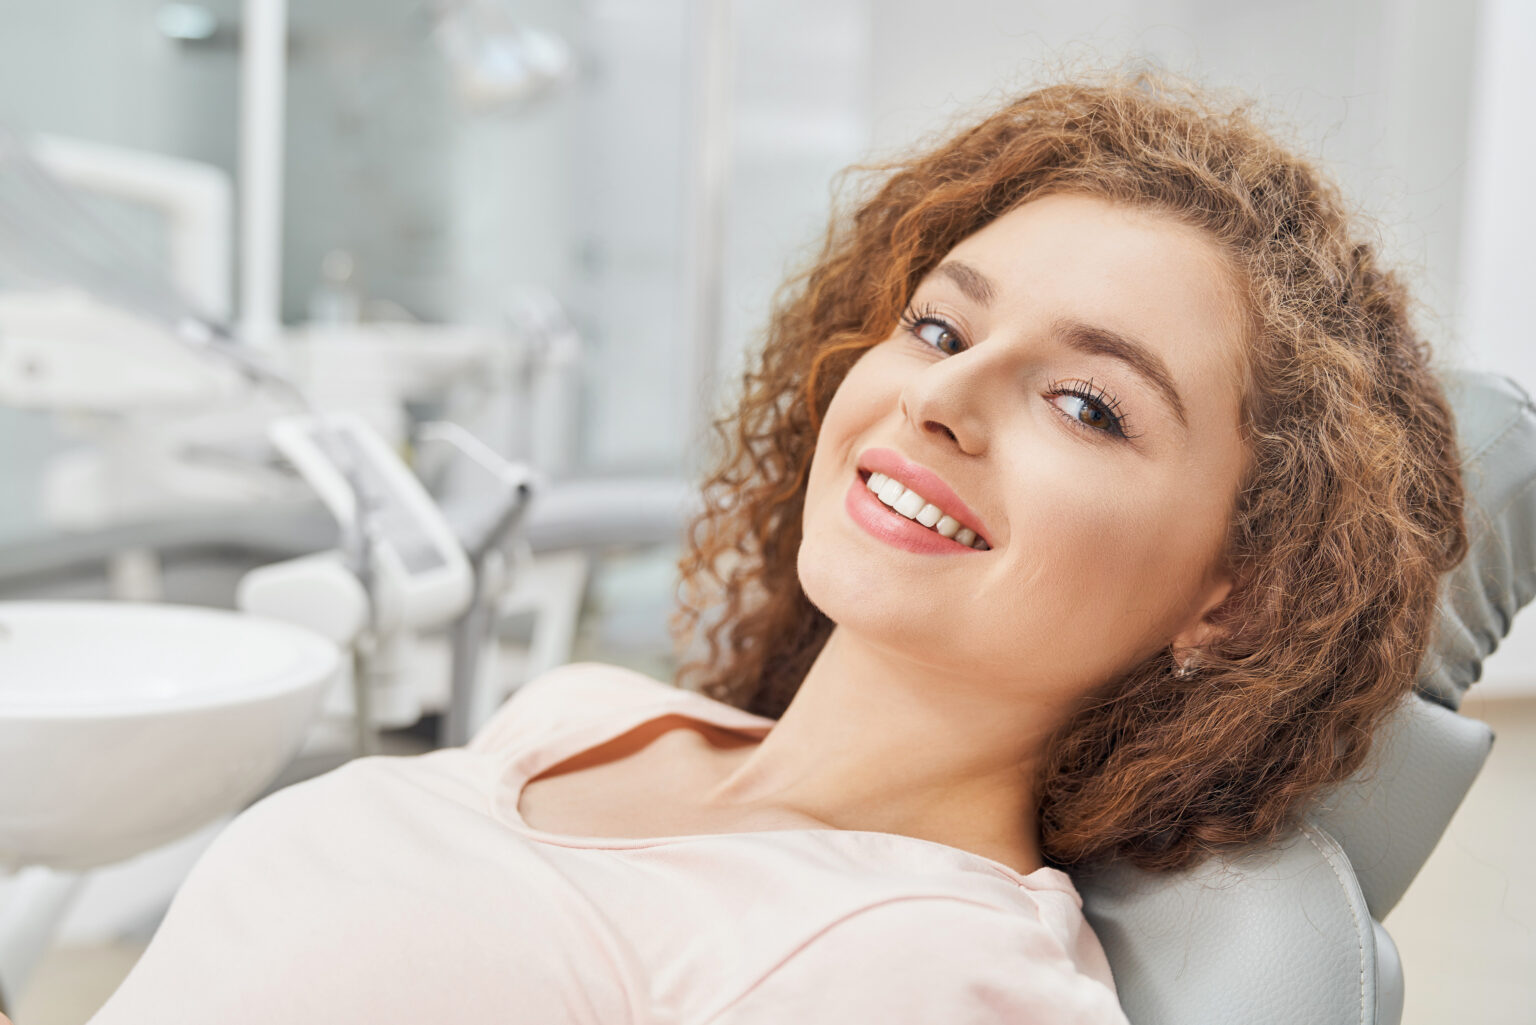 Beautiful female patient with curly hair in pink shirt sitting in dental clinic and waiting for teeth examination, smiling and looking at camera. Concept of medicine and treatment